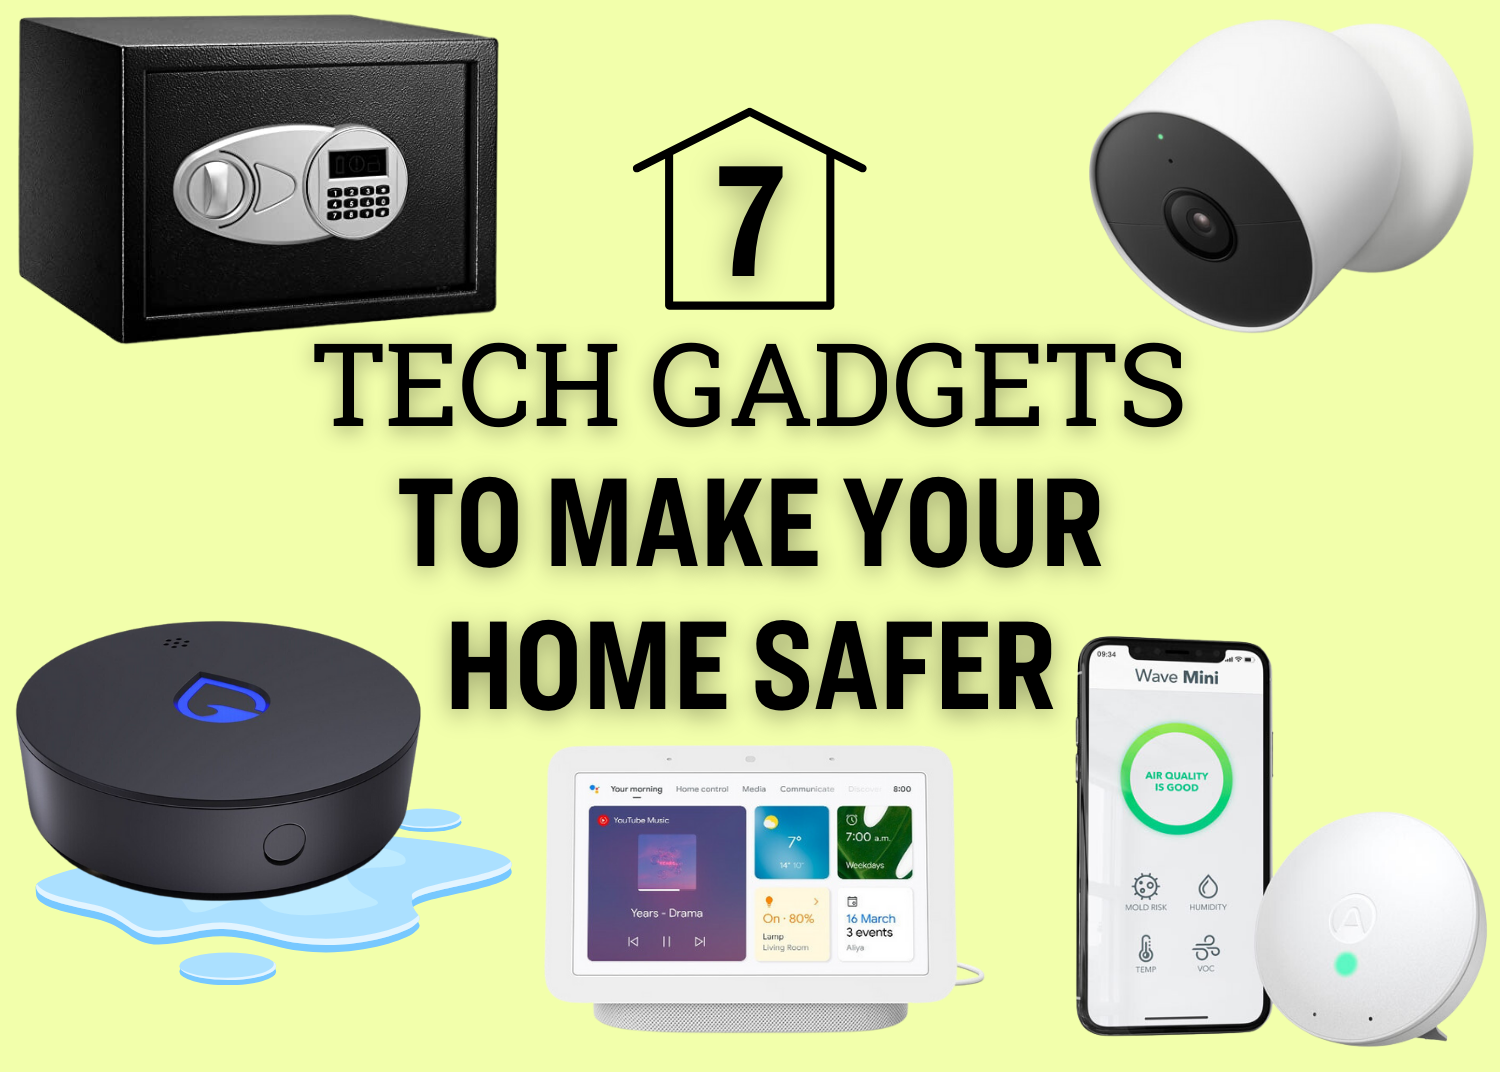 HOW TO: Keep creepers off your smart home gadgets! - Techish